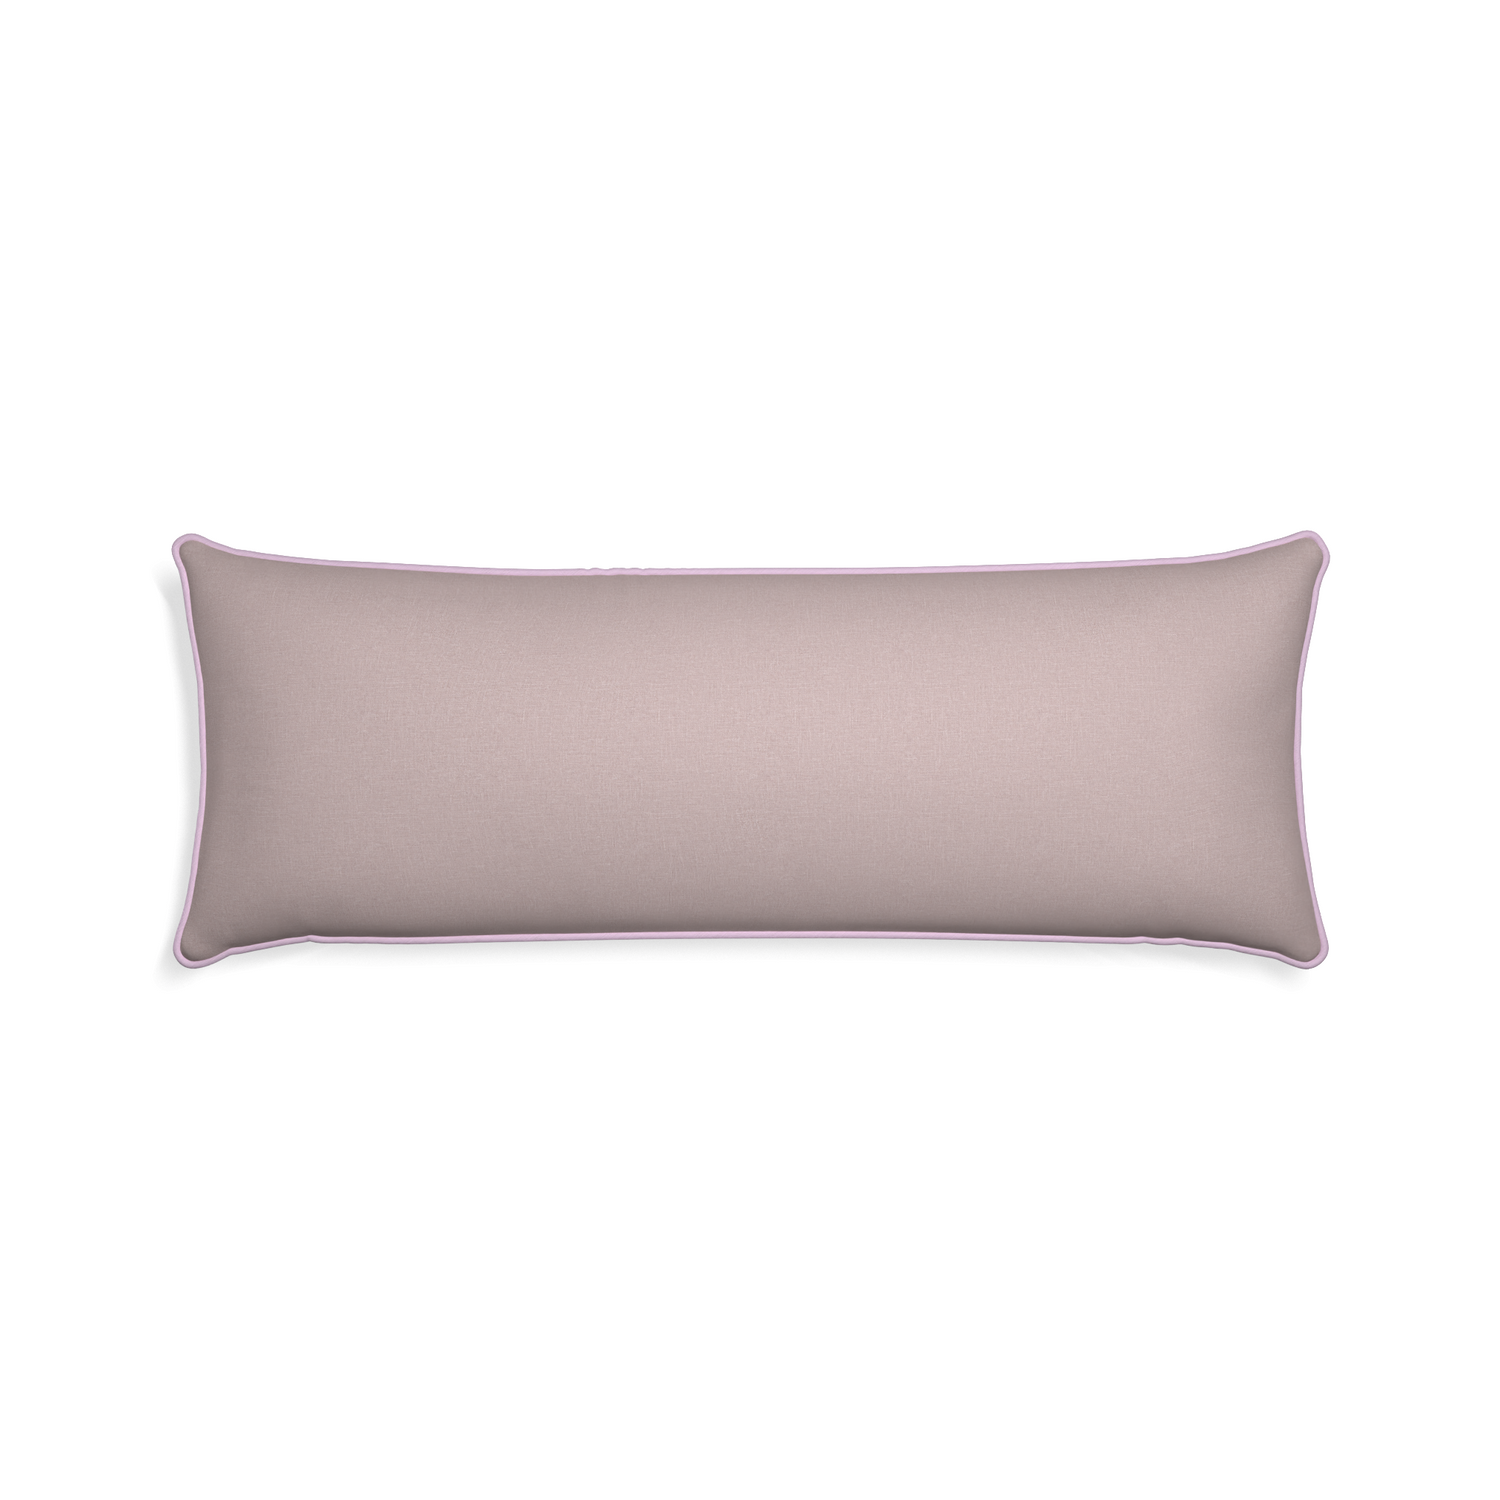 Xl-lumbar orchid custom mauve pinkpillow with l piping on white background